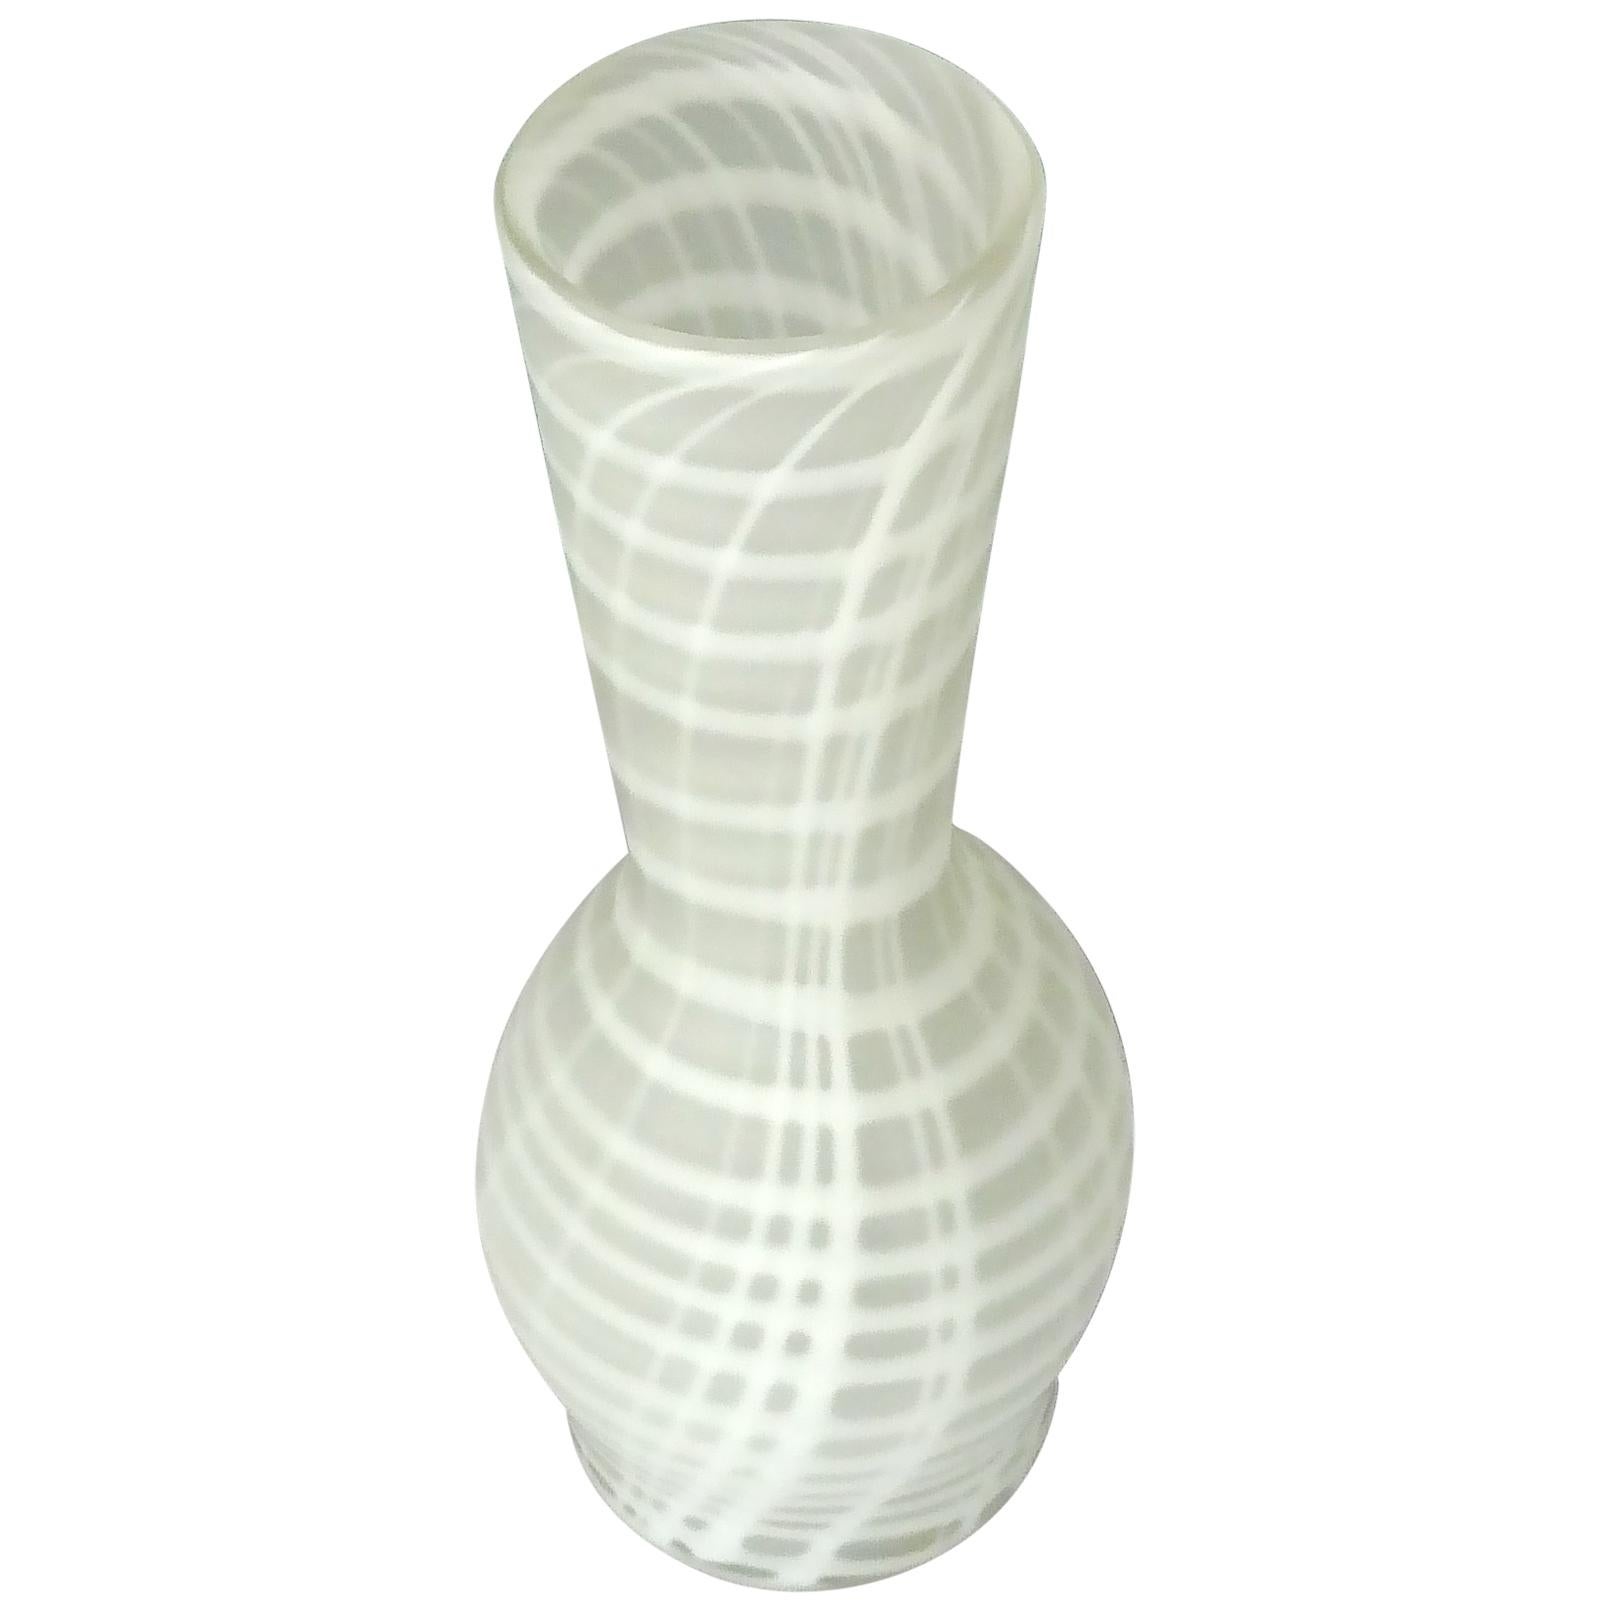 Signed Large Giuliano Tosi Art Glass Vase Satin White Stripes, Italy, 1970s For Sale